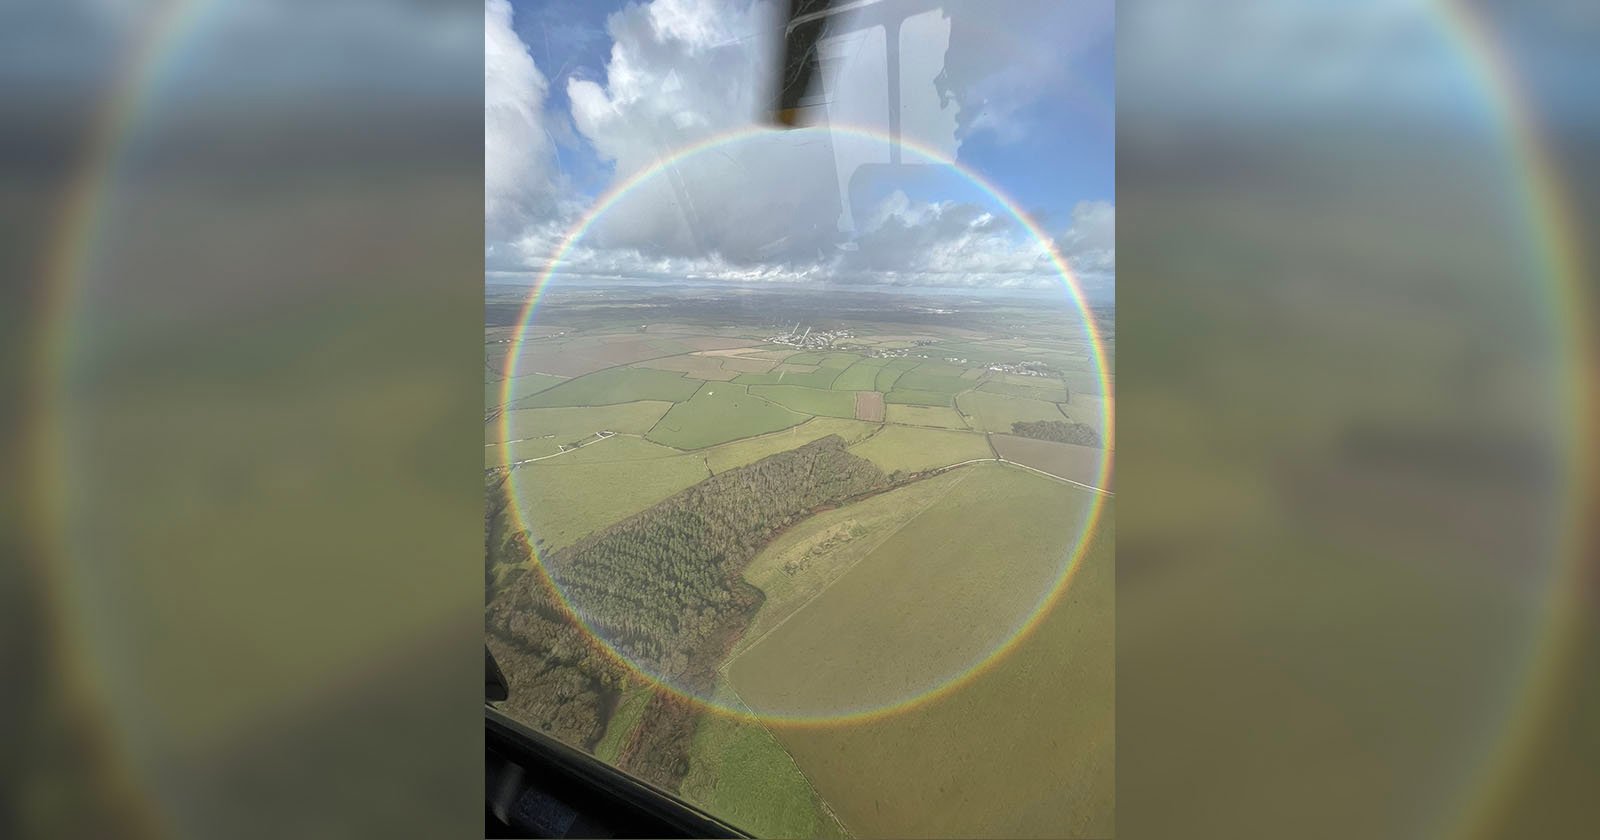  police helicopter gets close rare full-circle rainbow 